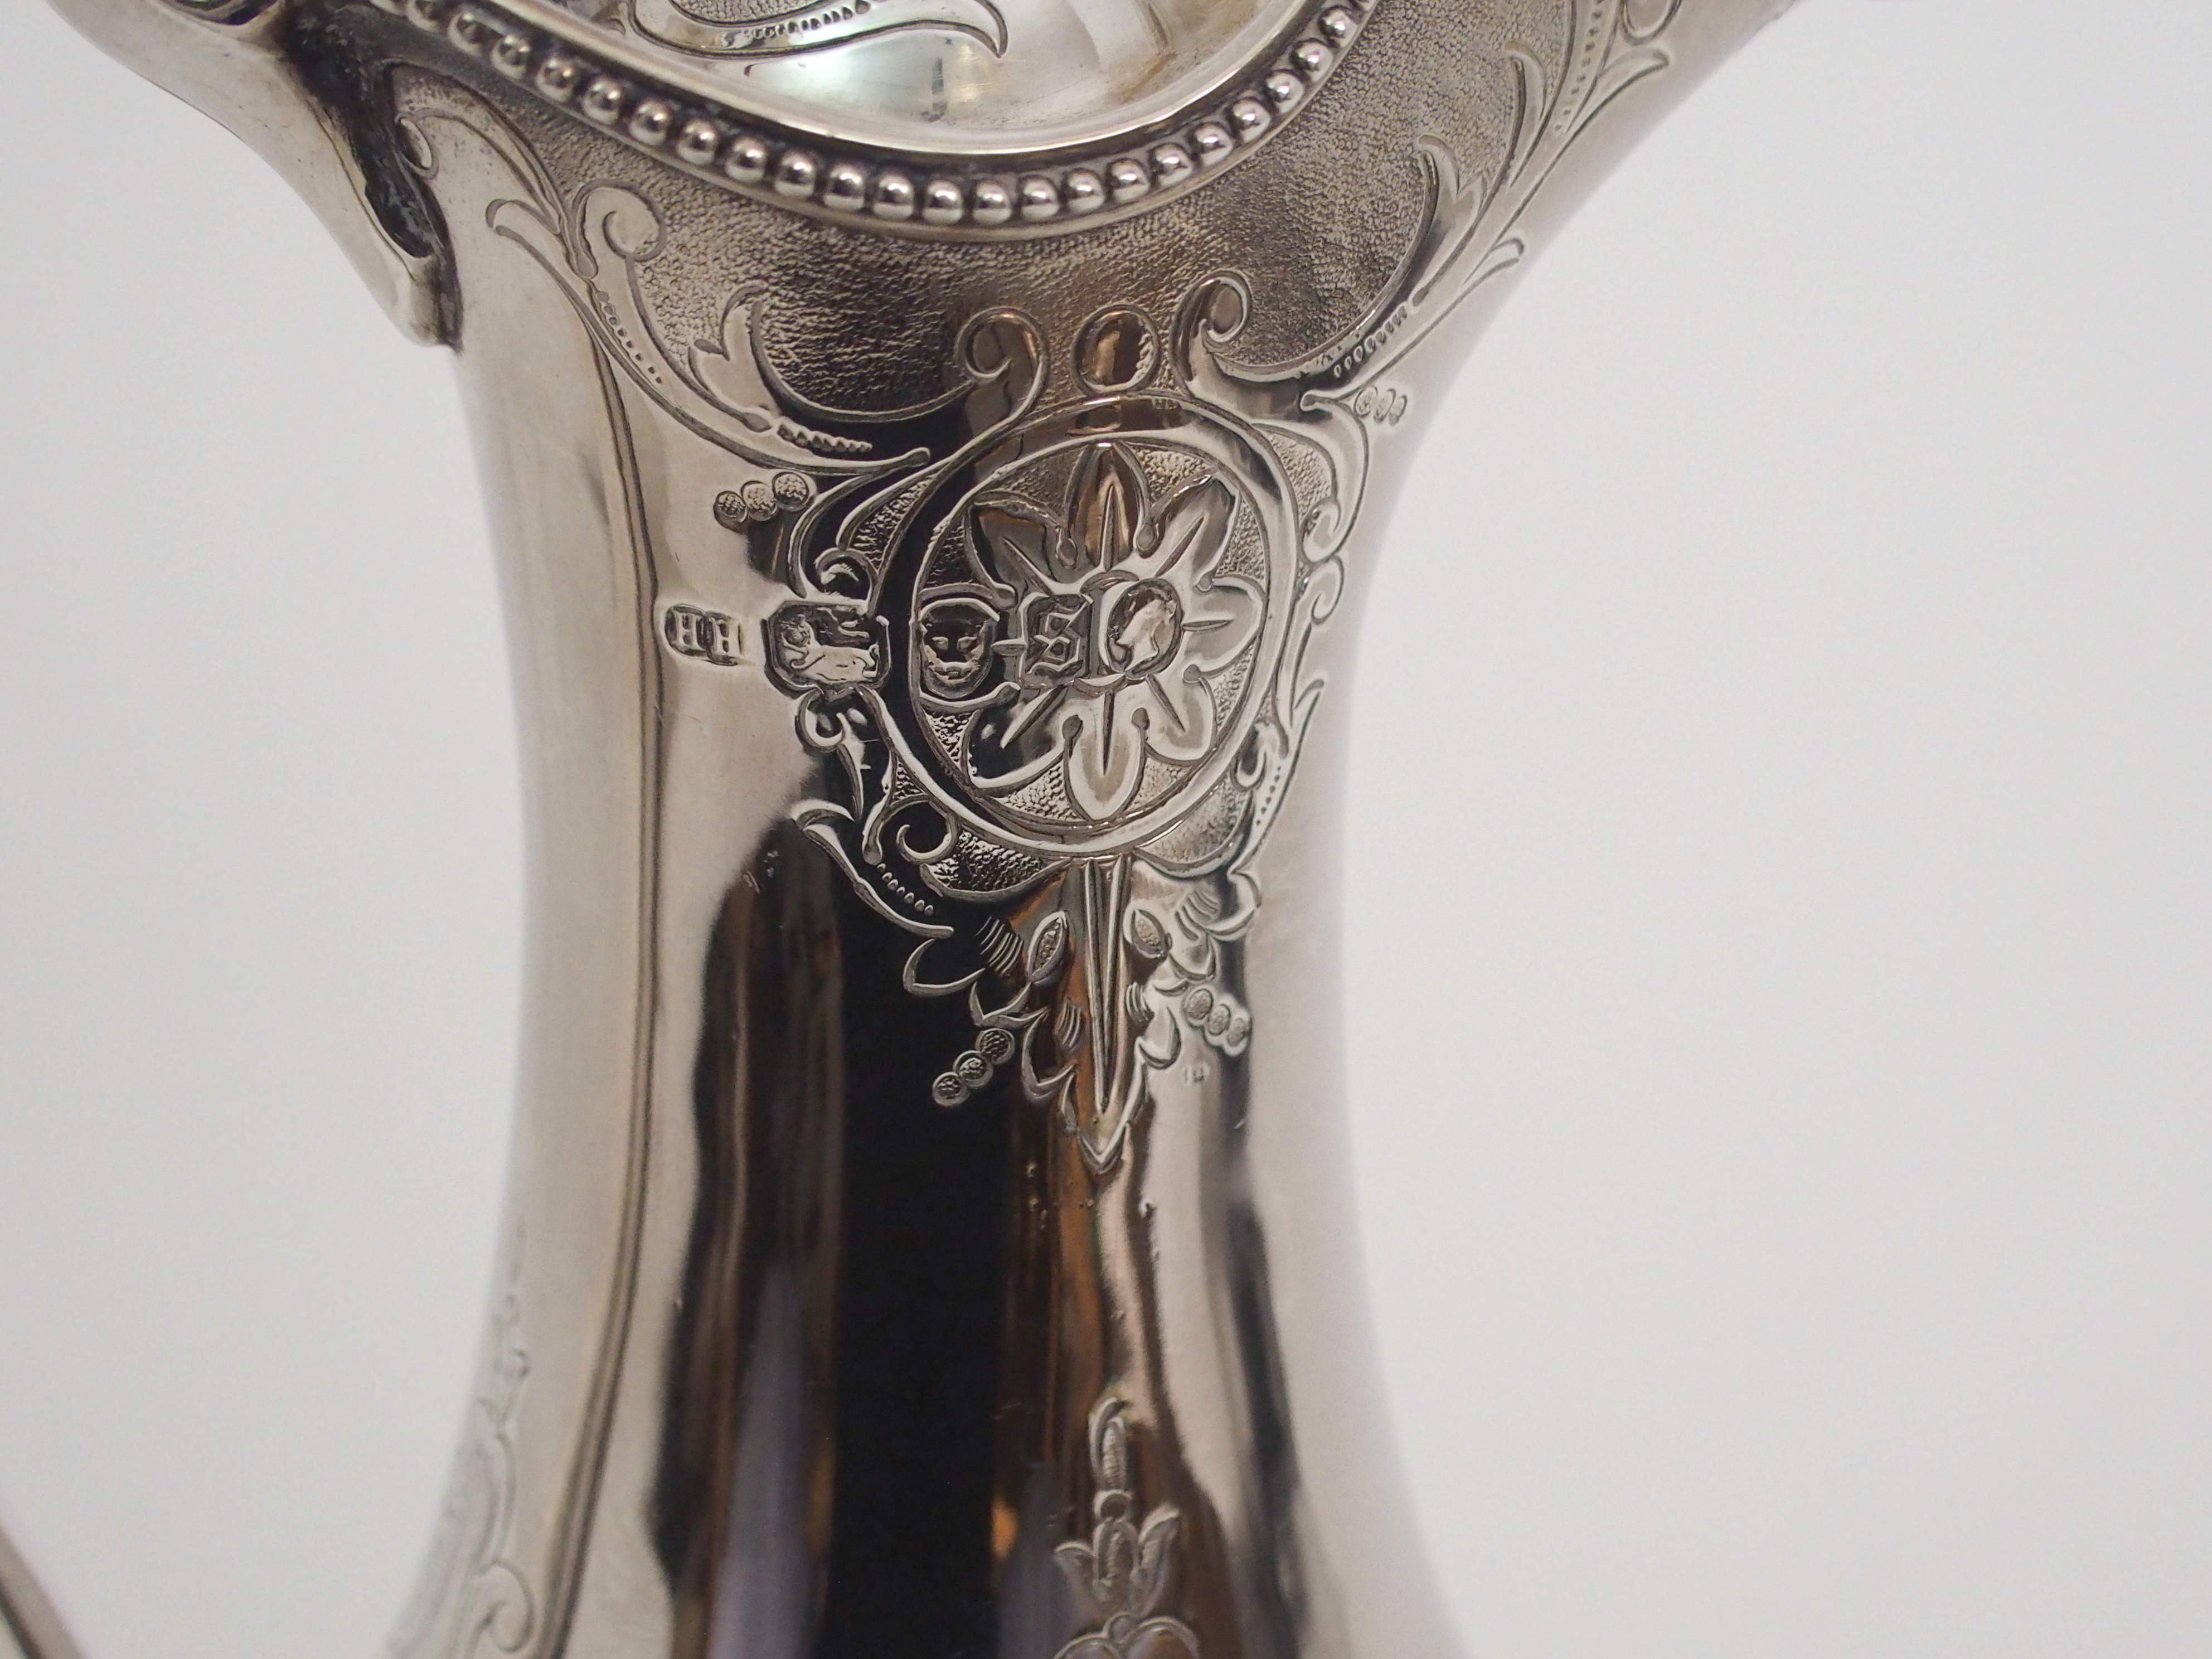 A VICTORIAN SILVER CLARET JUG by Harrison Brothers & Howson, London 1873, of baluster form with - Image 8 of 8